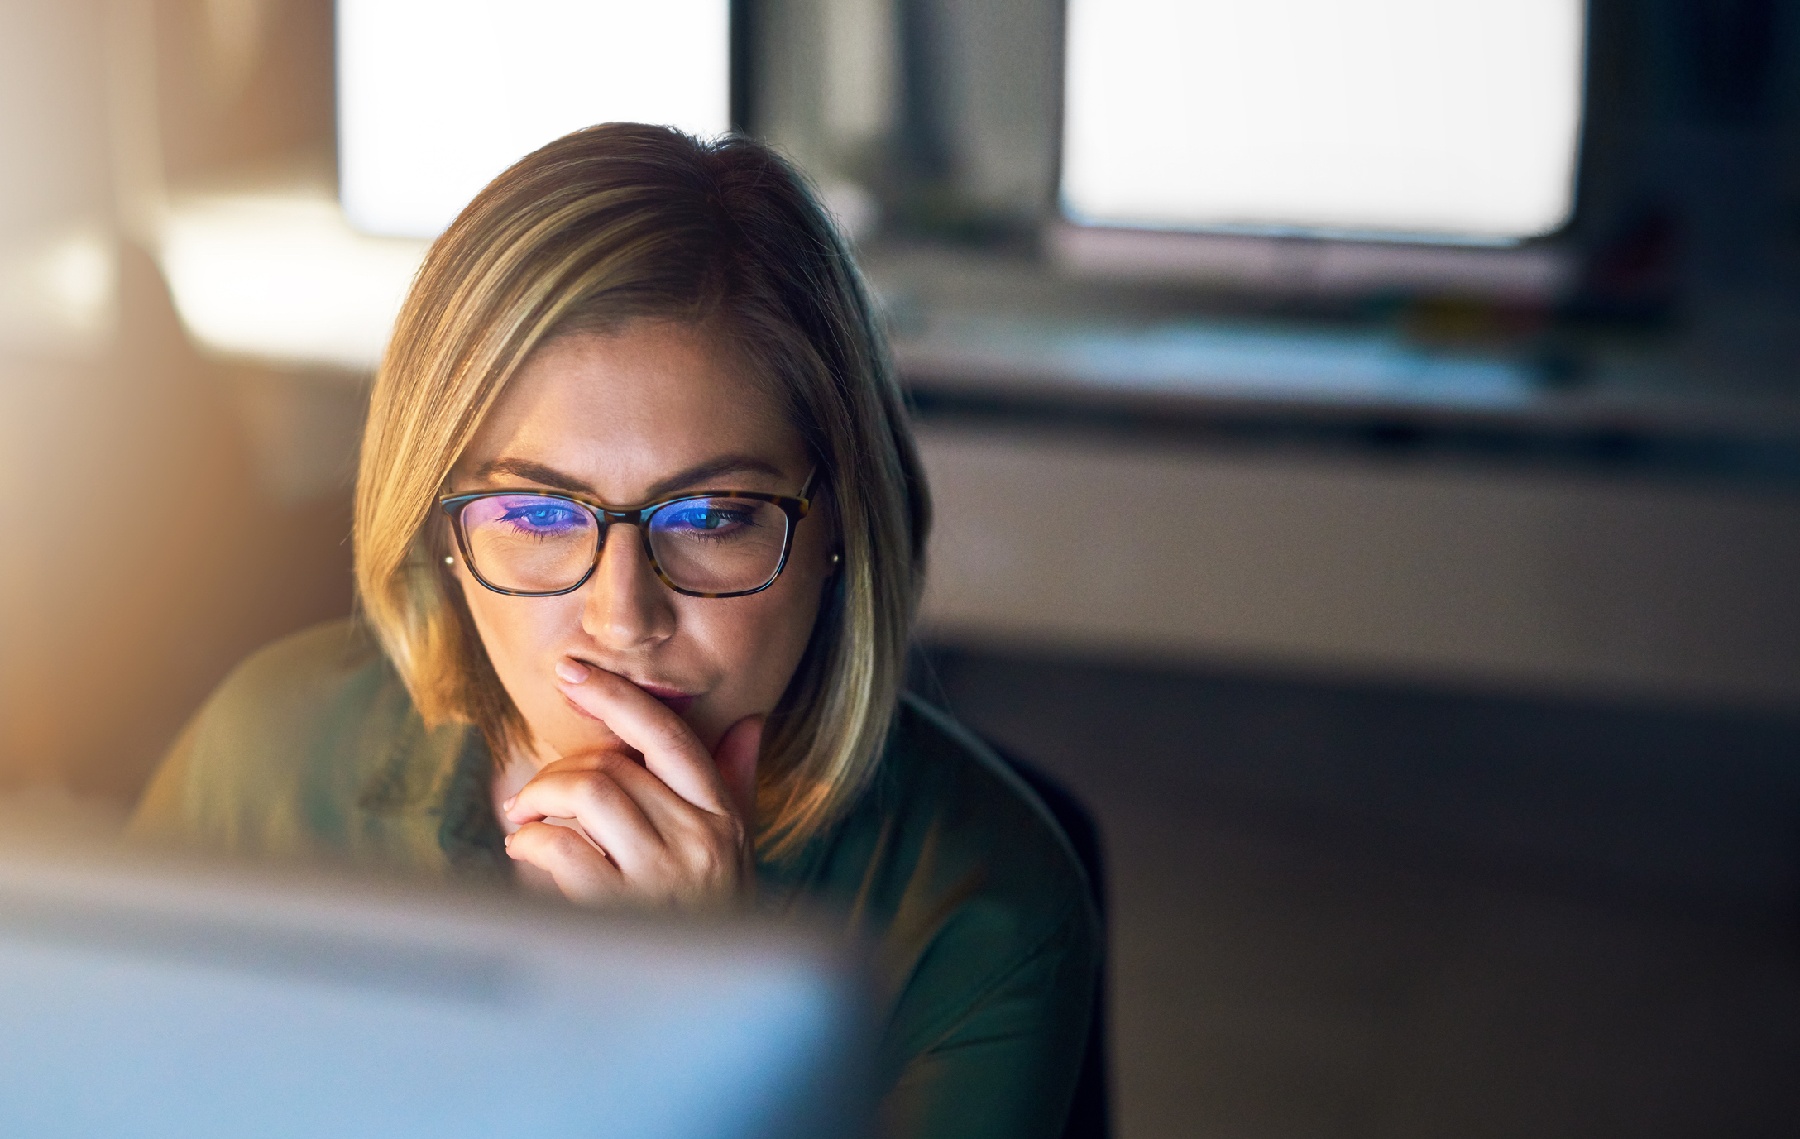 woman with glasses on looking intently at computer screen reviewing email security